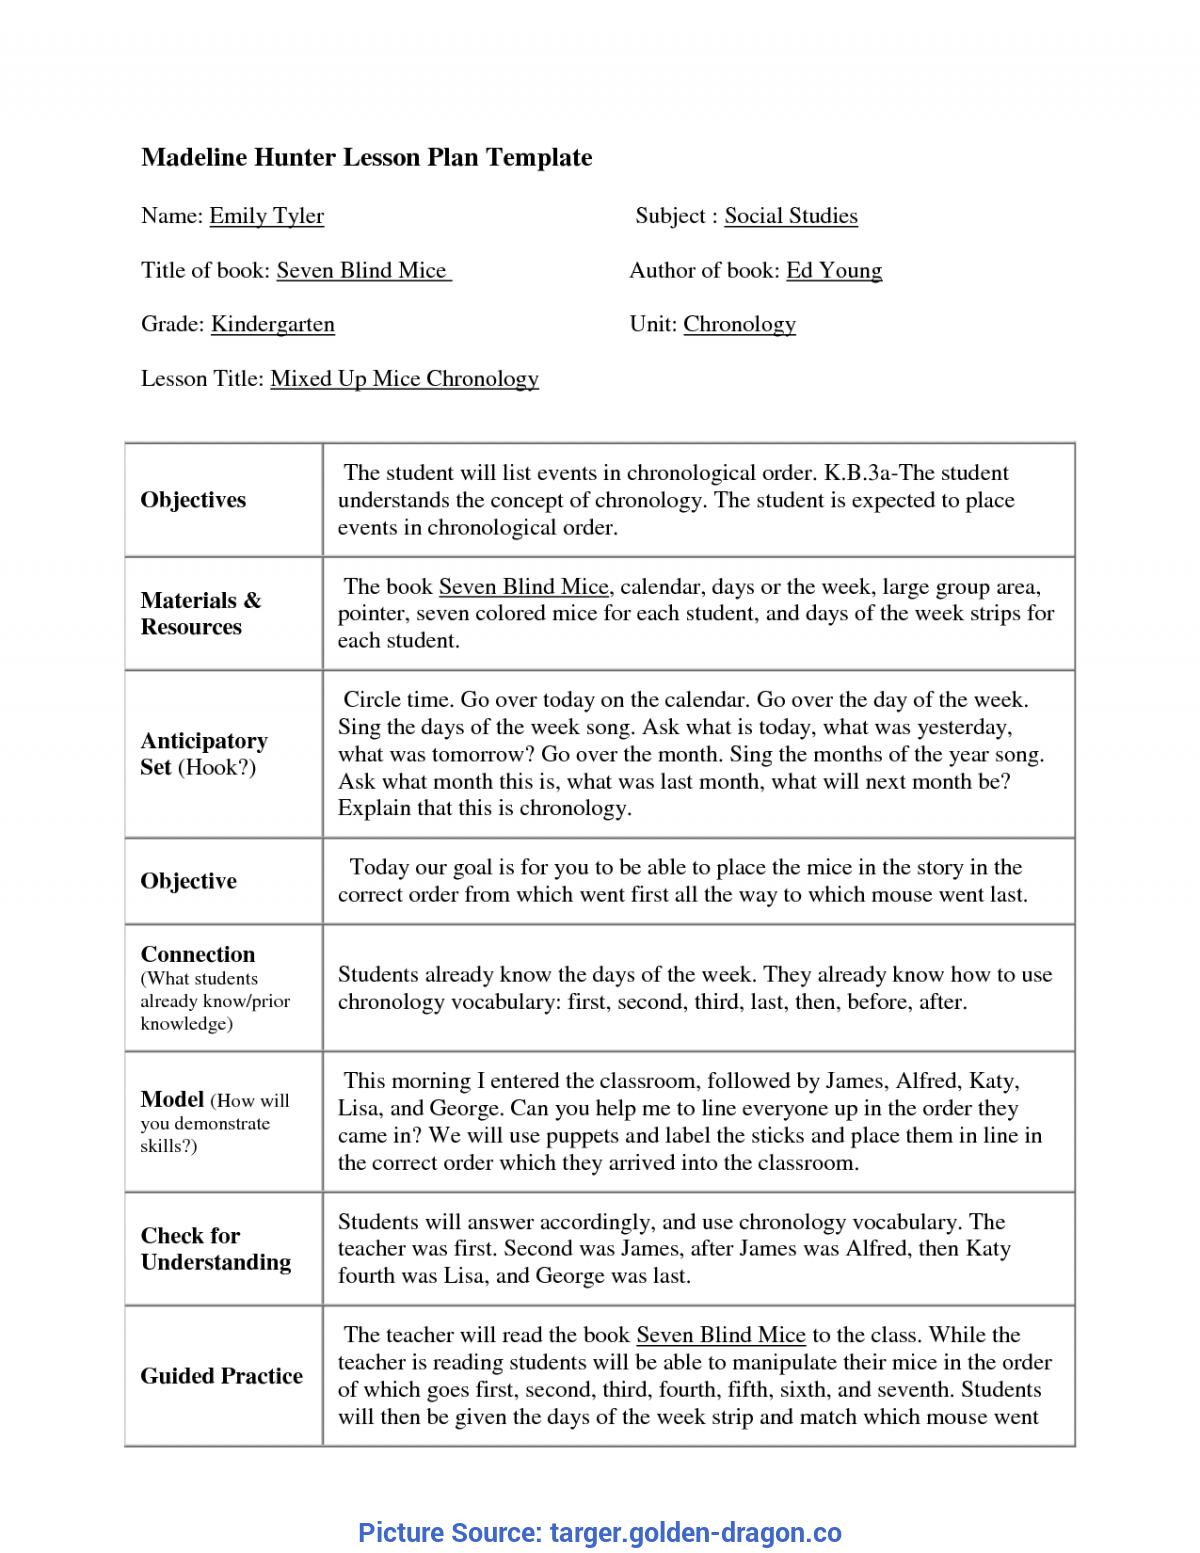 Madeline Hunter Lesson Plan Example – Mahre.horizonconsulting.co Inside Madeline Hunter Lesson Plan Template Word